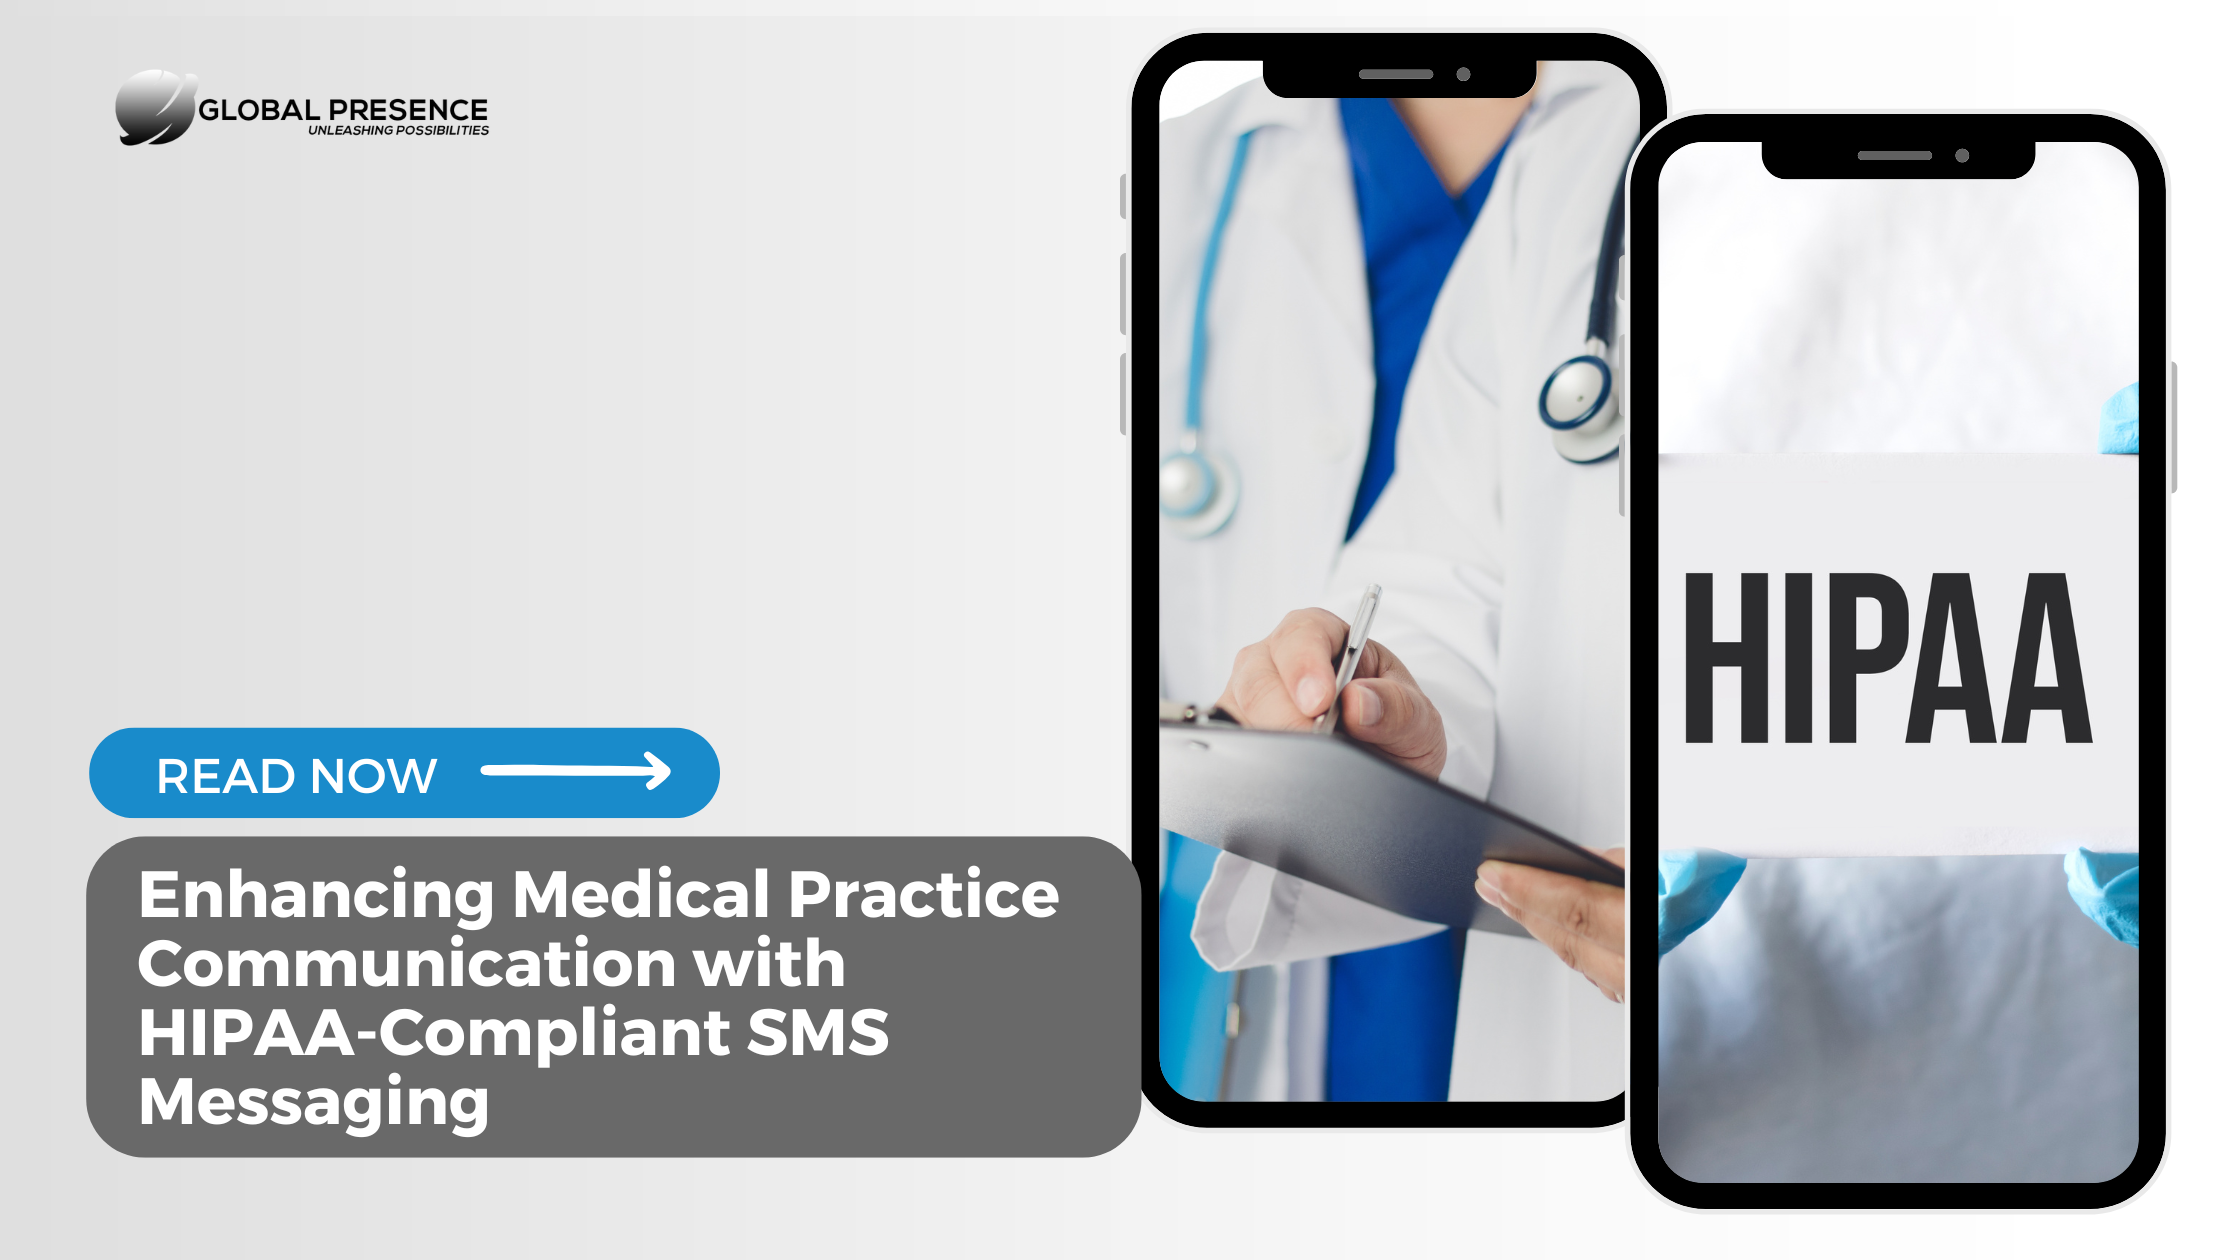 Enhancing Medical Practice Communication with HIPAA-Compliant SMS Messaging